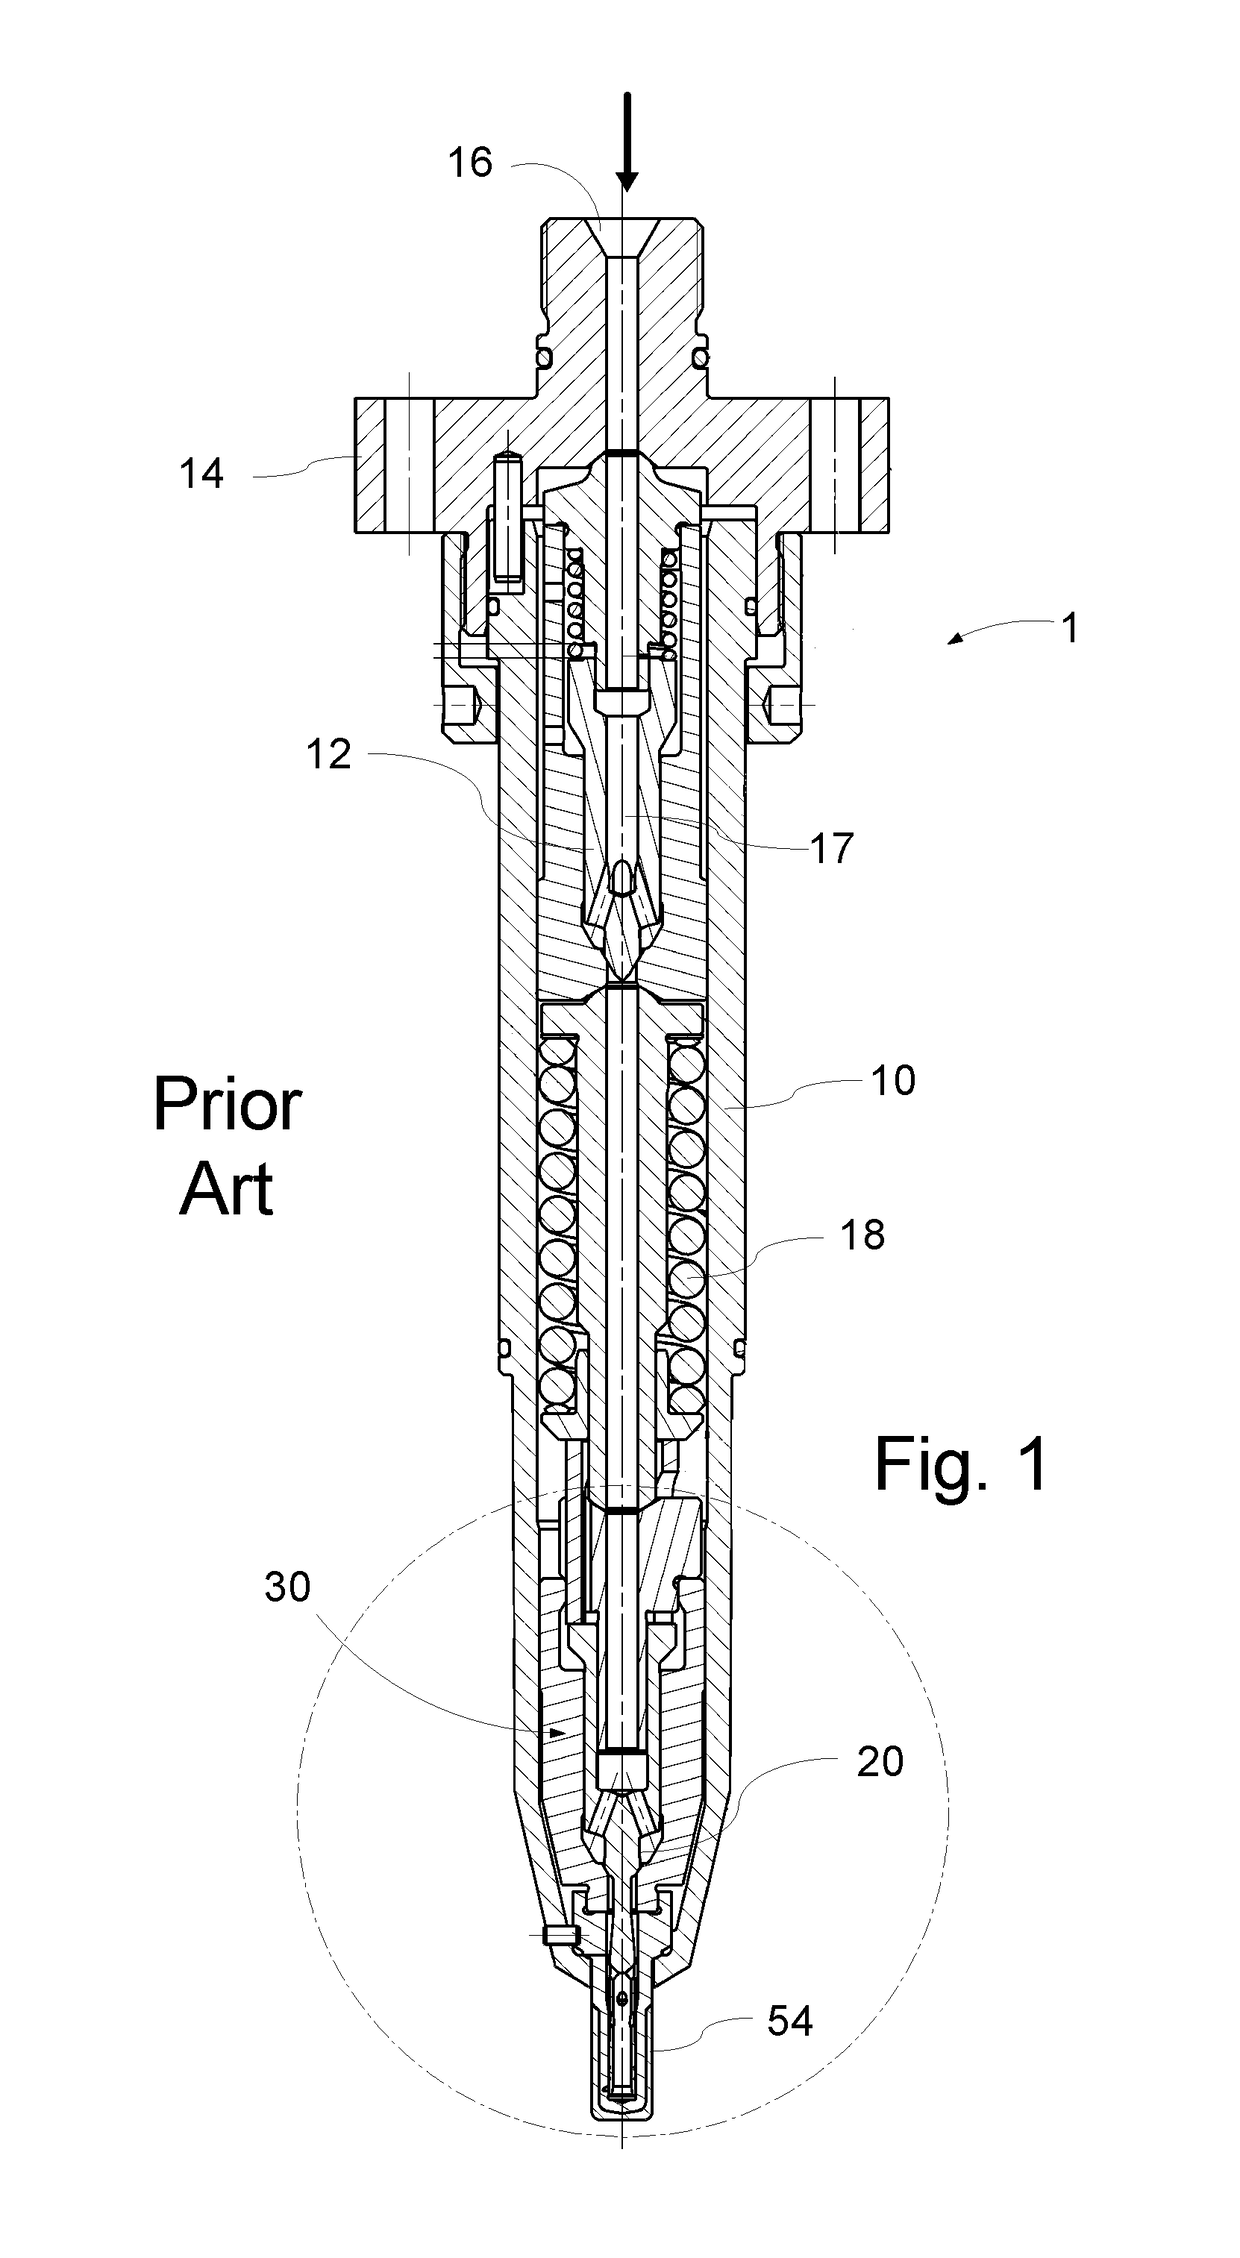 A fuel valve for a large two-stroke self-igniting internal combustion engine